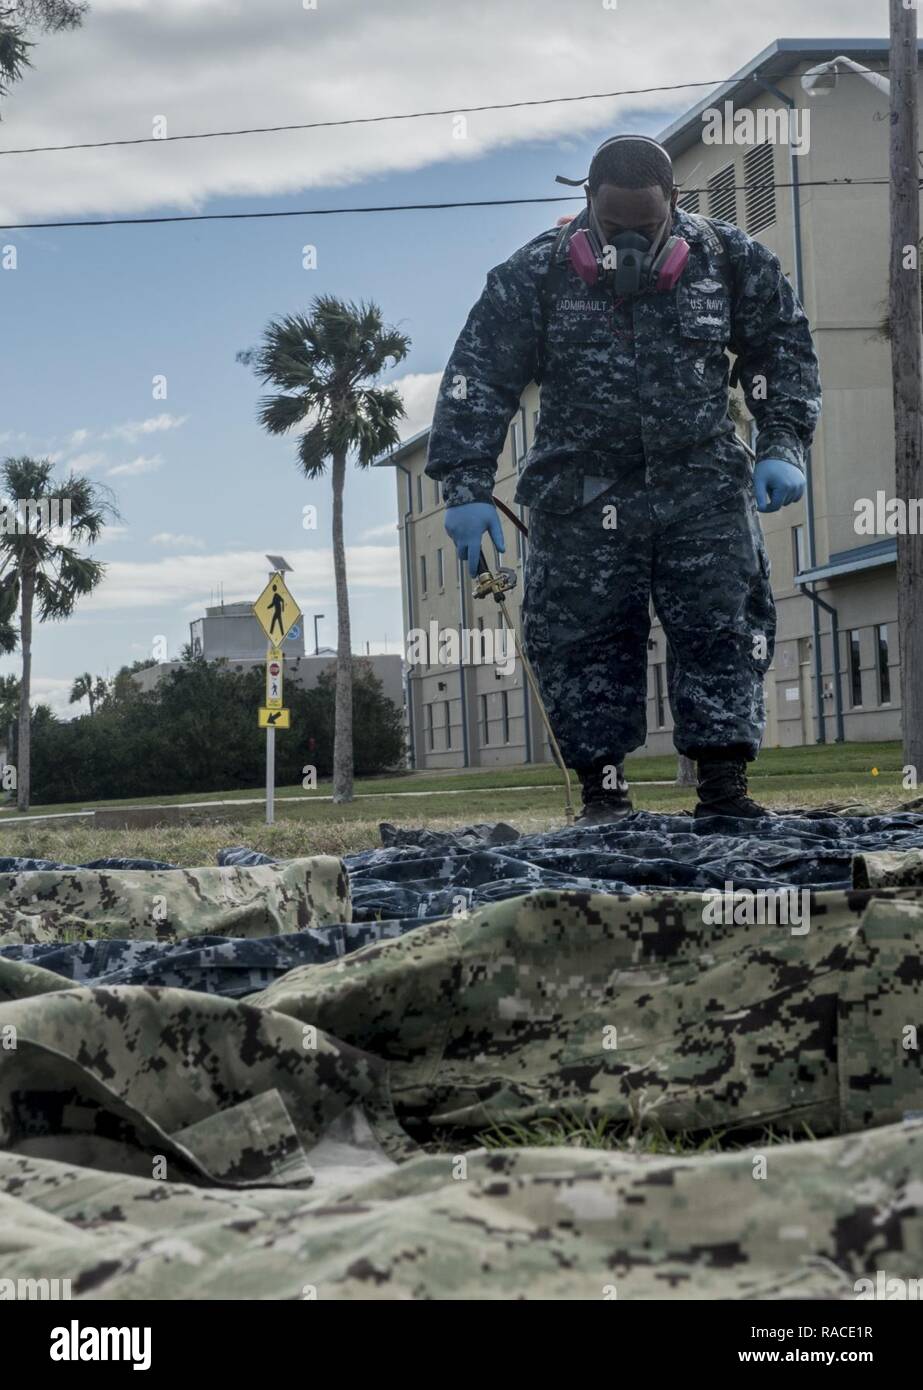 (Jan. 23, 2017) MAYPORT, Fla. - Hospital Corpsman 1st Class Dominic L'Admirault of Navy Entomology Center of Excellence (NECE) Jacksonville, Fla., applies the insect repellant Permethrin to uniforms at Naval Station Mayport, Fla. Treating uniforms is one of many preparations service members are taking before departing on Continuing Promise 2017 (CP-17). Continuing Promise 2017 is a U.S. Southern Command-sponsored and U.S. Naval Forces Southern Command/U.S. 4th Fleet-conducted deployment to conduct civil-military operations including humanitarian assistance, training engagements, and medical, d Stock Photo